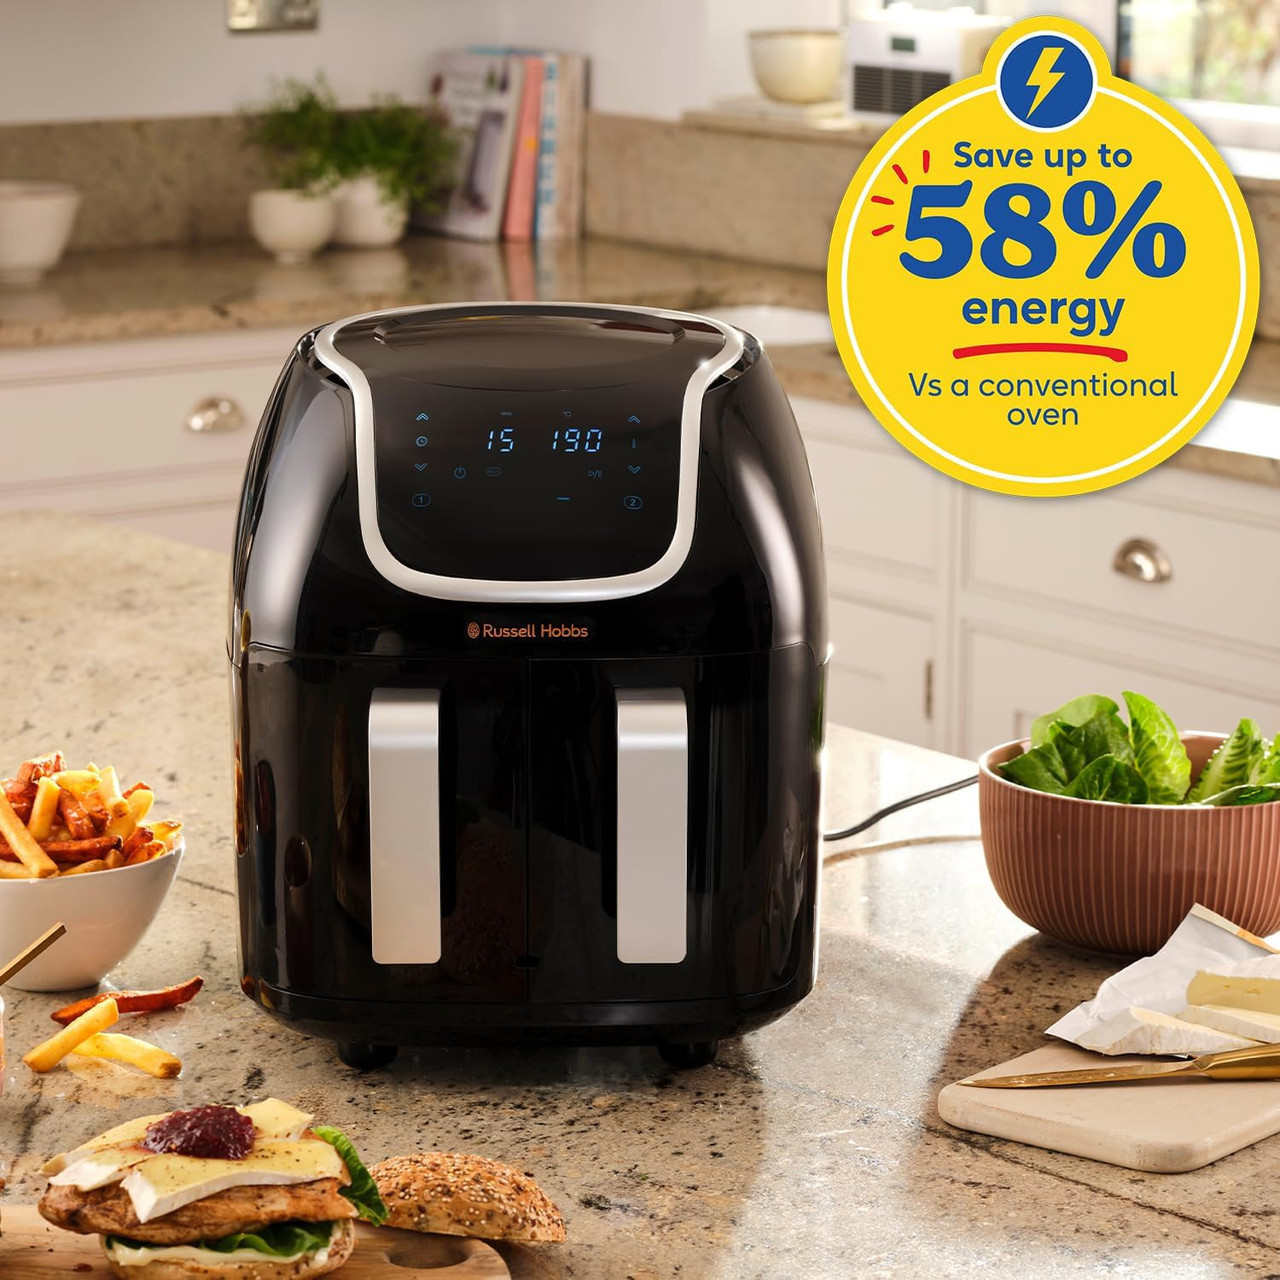 Is The Russell Hobbs Air Fryer The Best On The Market?